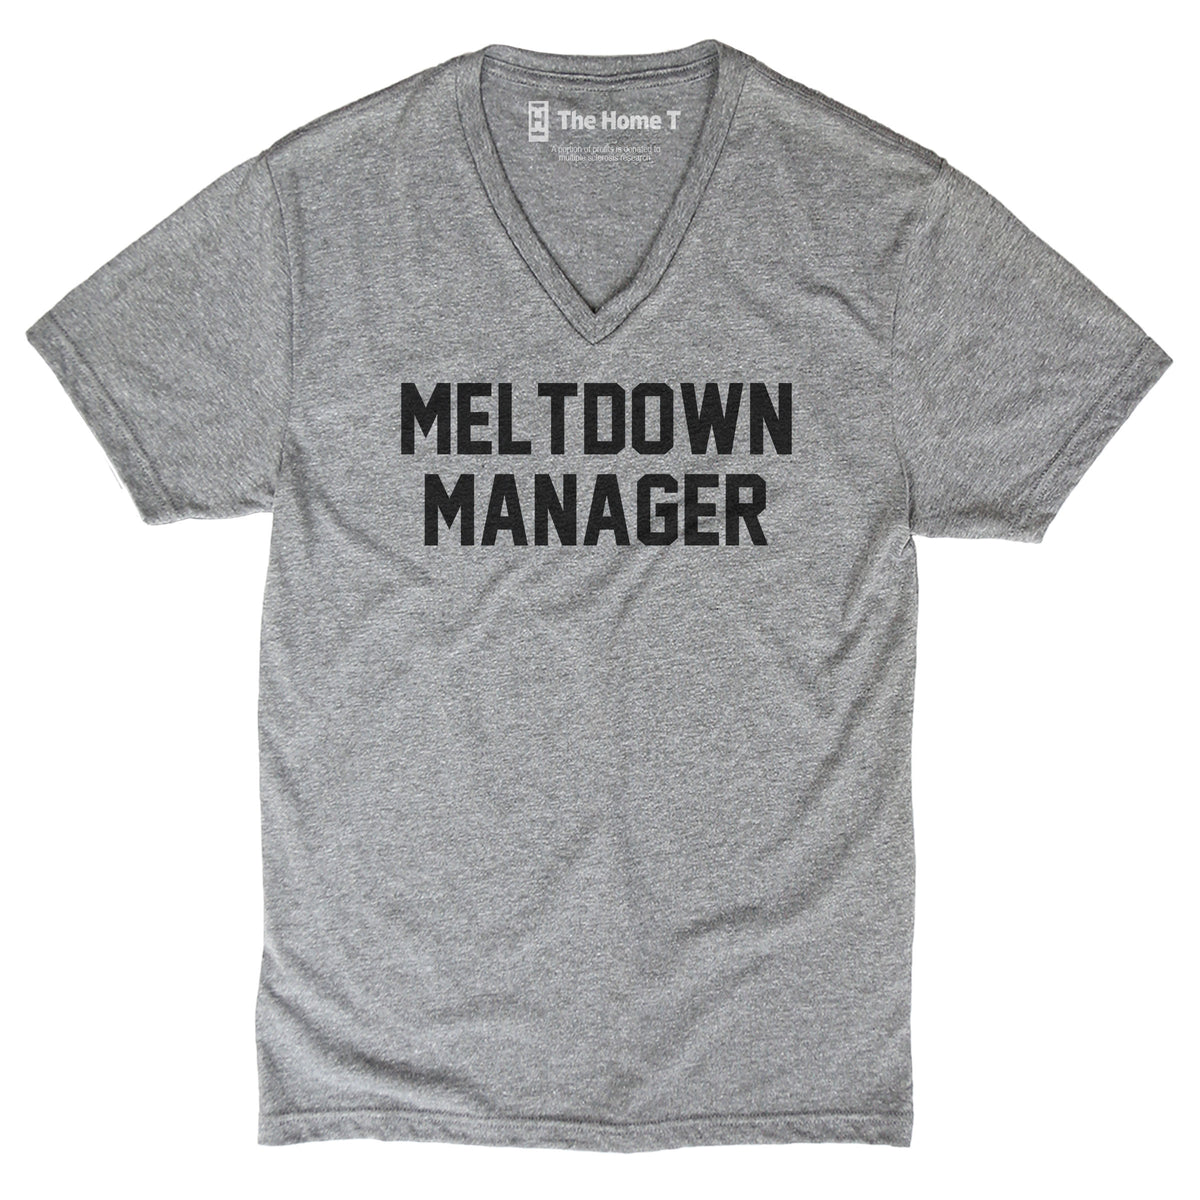 Meltdown Manager The Home T